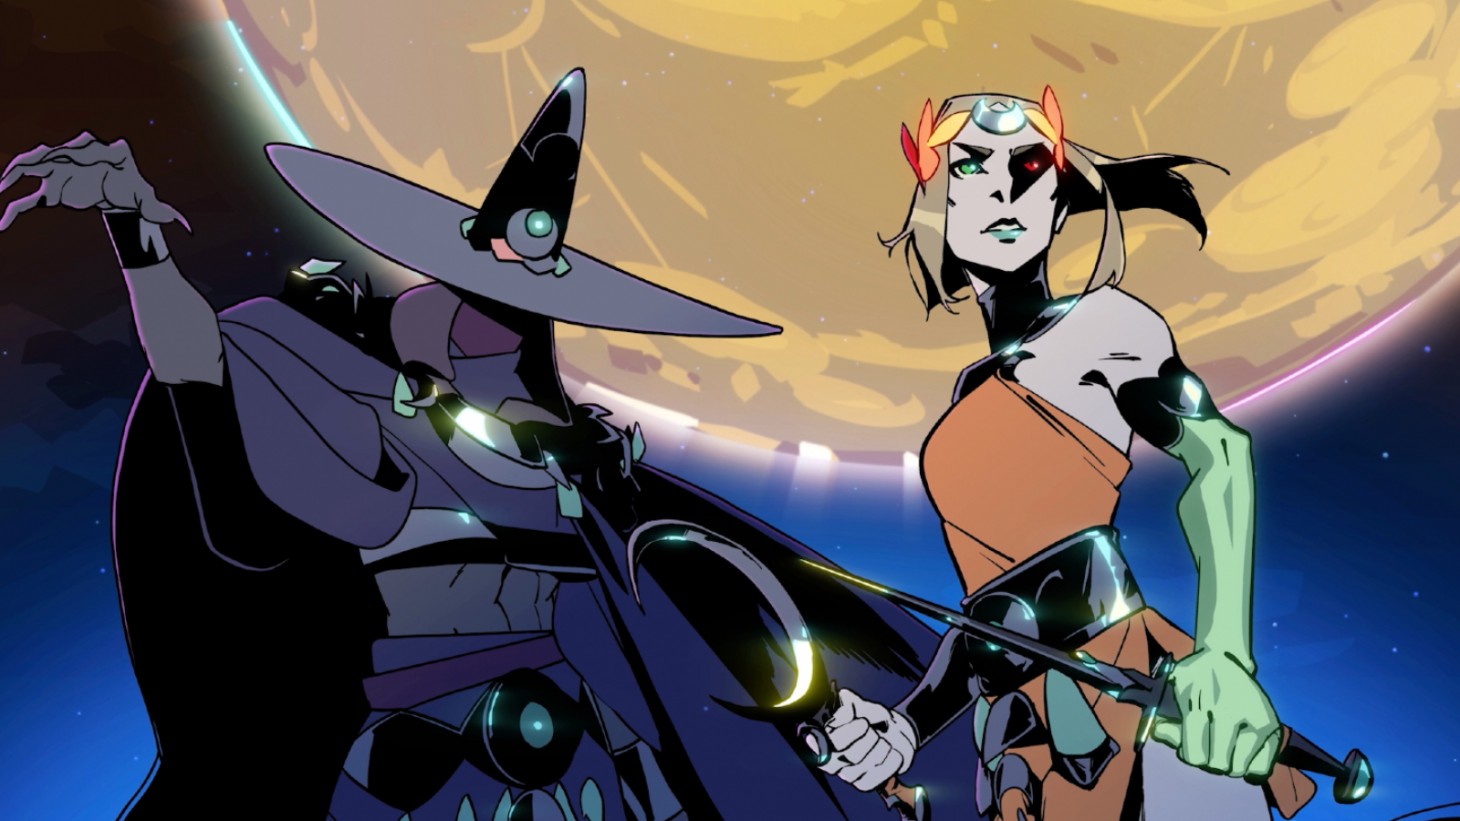 Supergiant Games Announces Hades II Early Access Starts Next Year